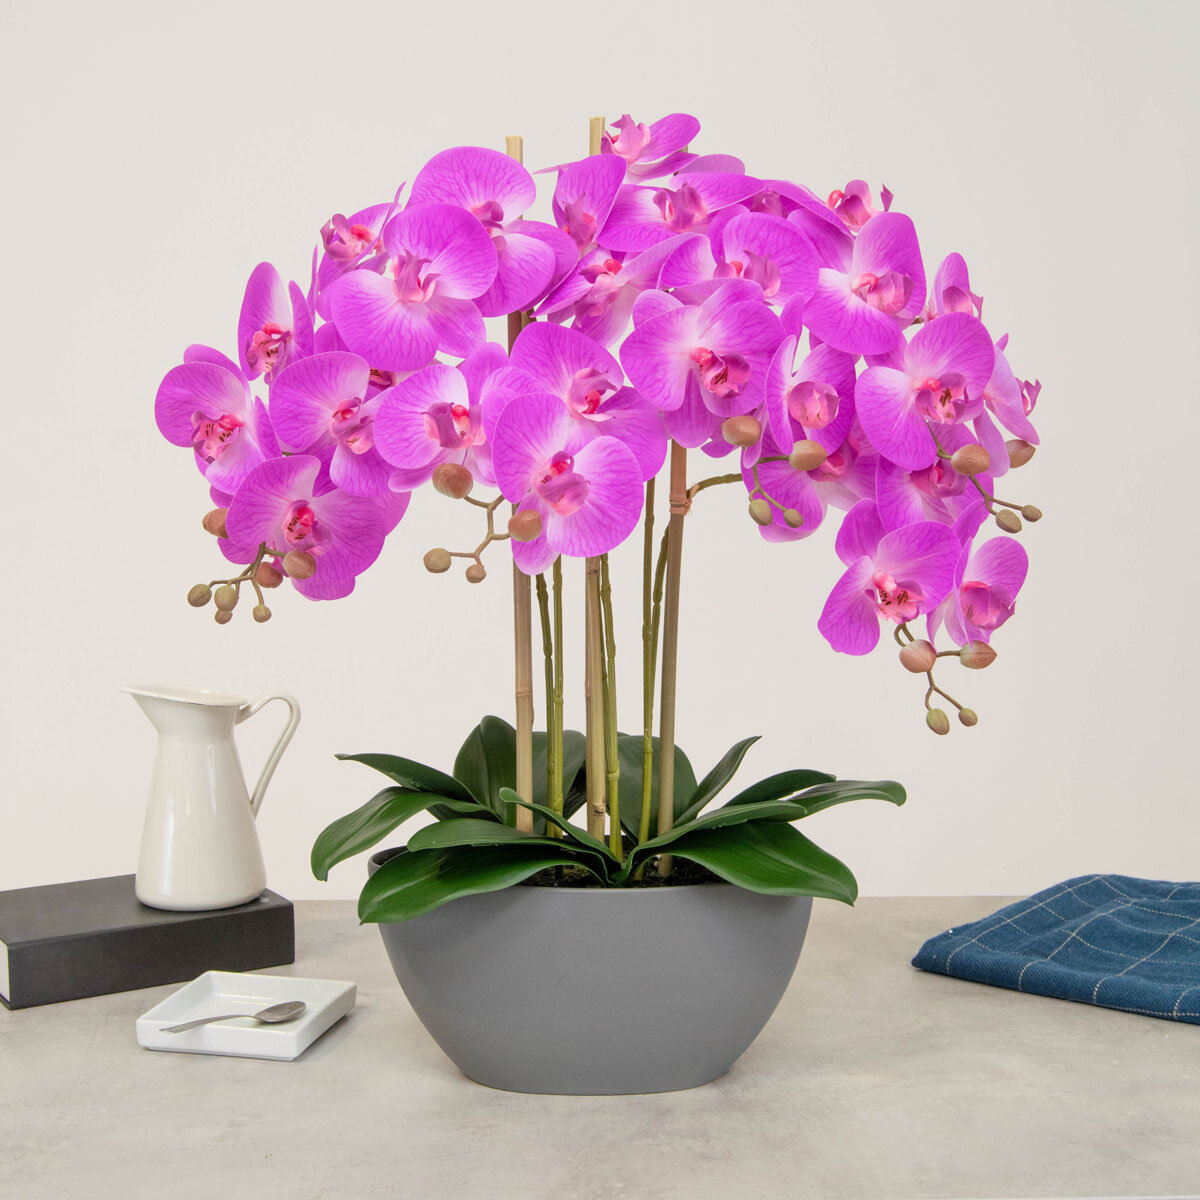 Glass Vase LED String Light Artificial Pink Orchid Flowers Home Decor And Gift 